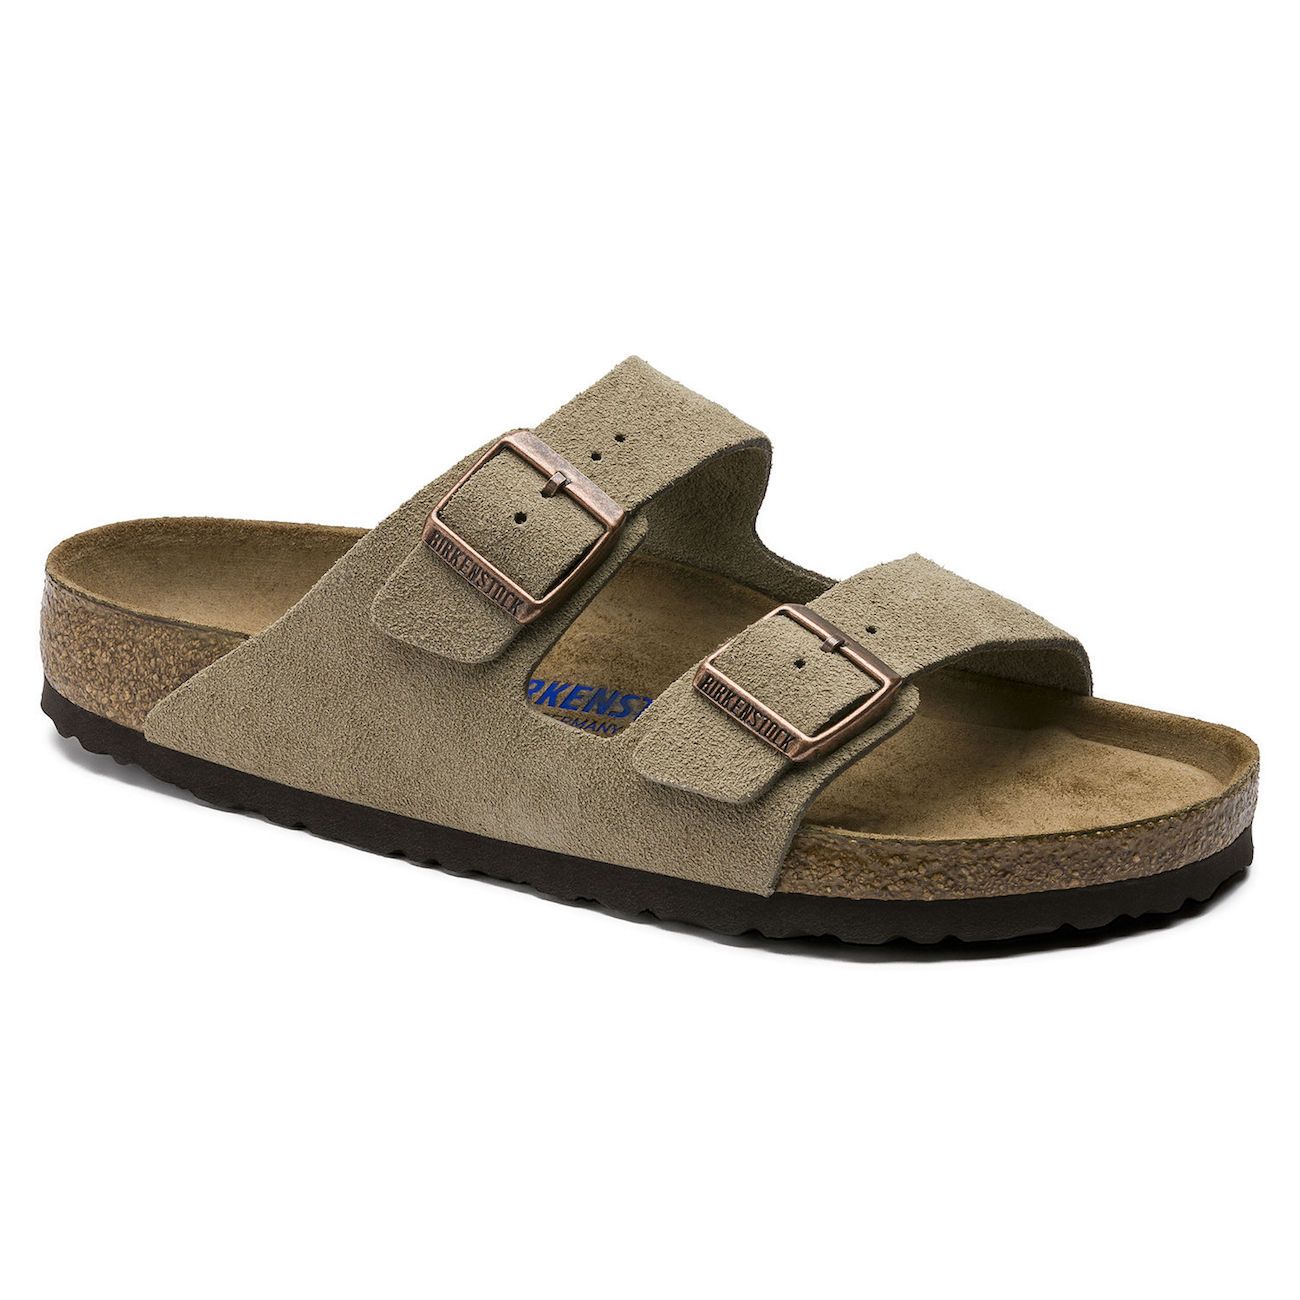 Footbed soft - replacement part for Birkenstock Sandals | Tony Pappas -  Tony Pappas - Footwear store